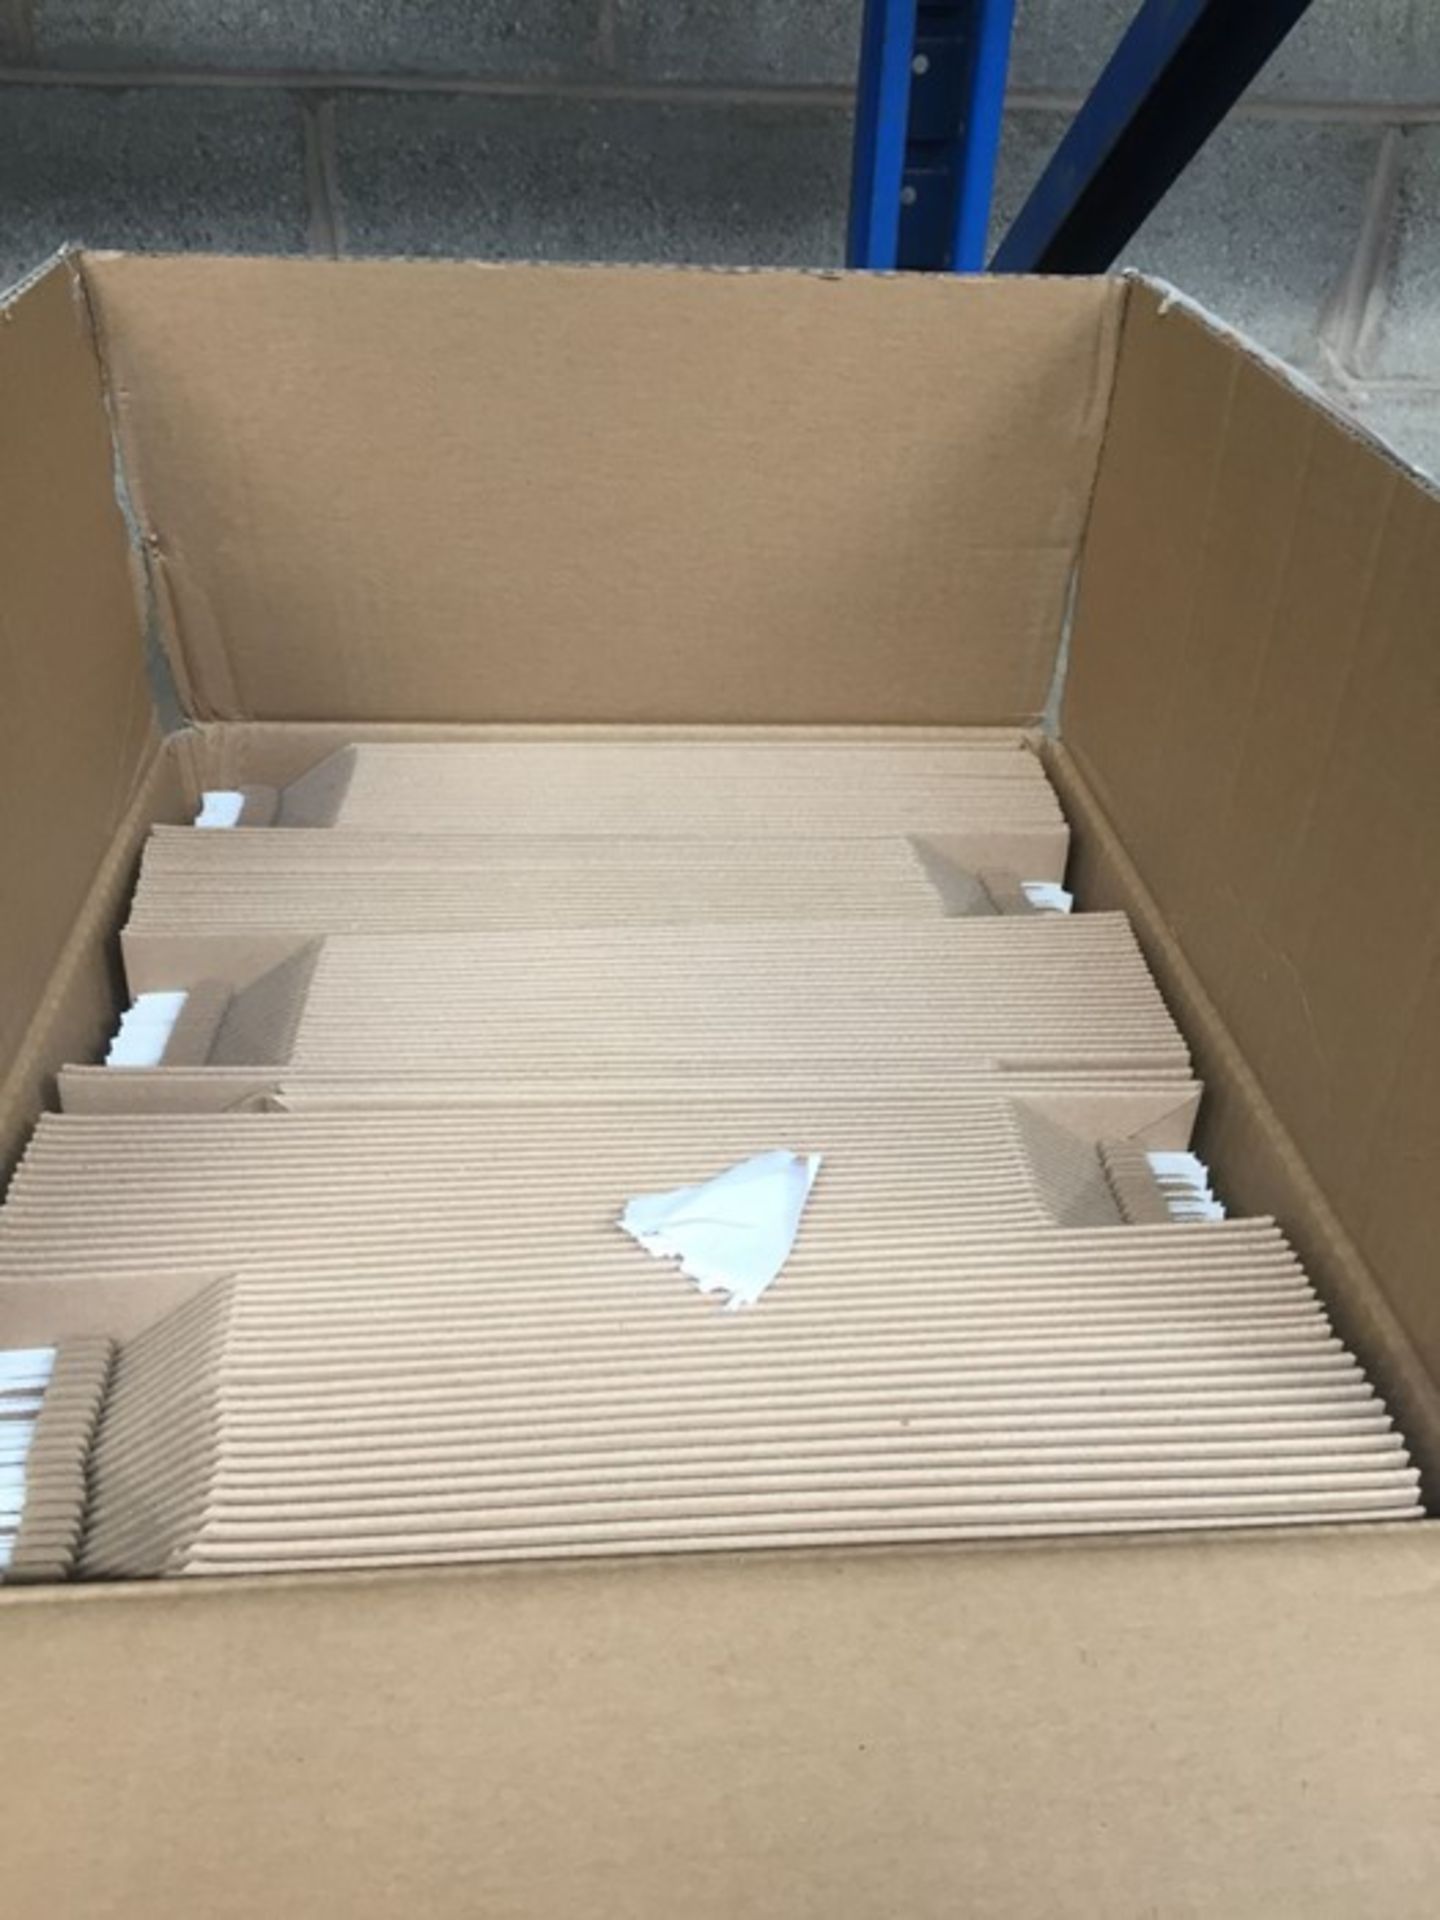 1 LOT TO CONTAIN 1 X BOX OF 100 STIFFENED CARDBOARD MAILING ENVELOPES